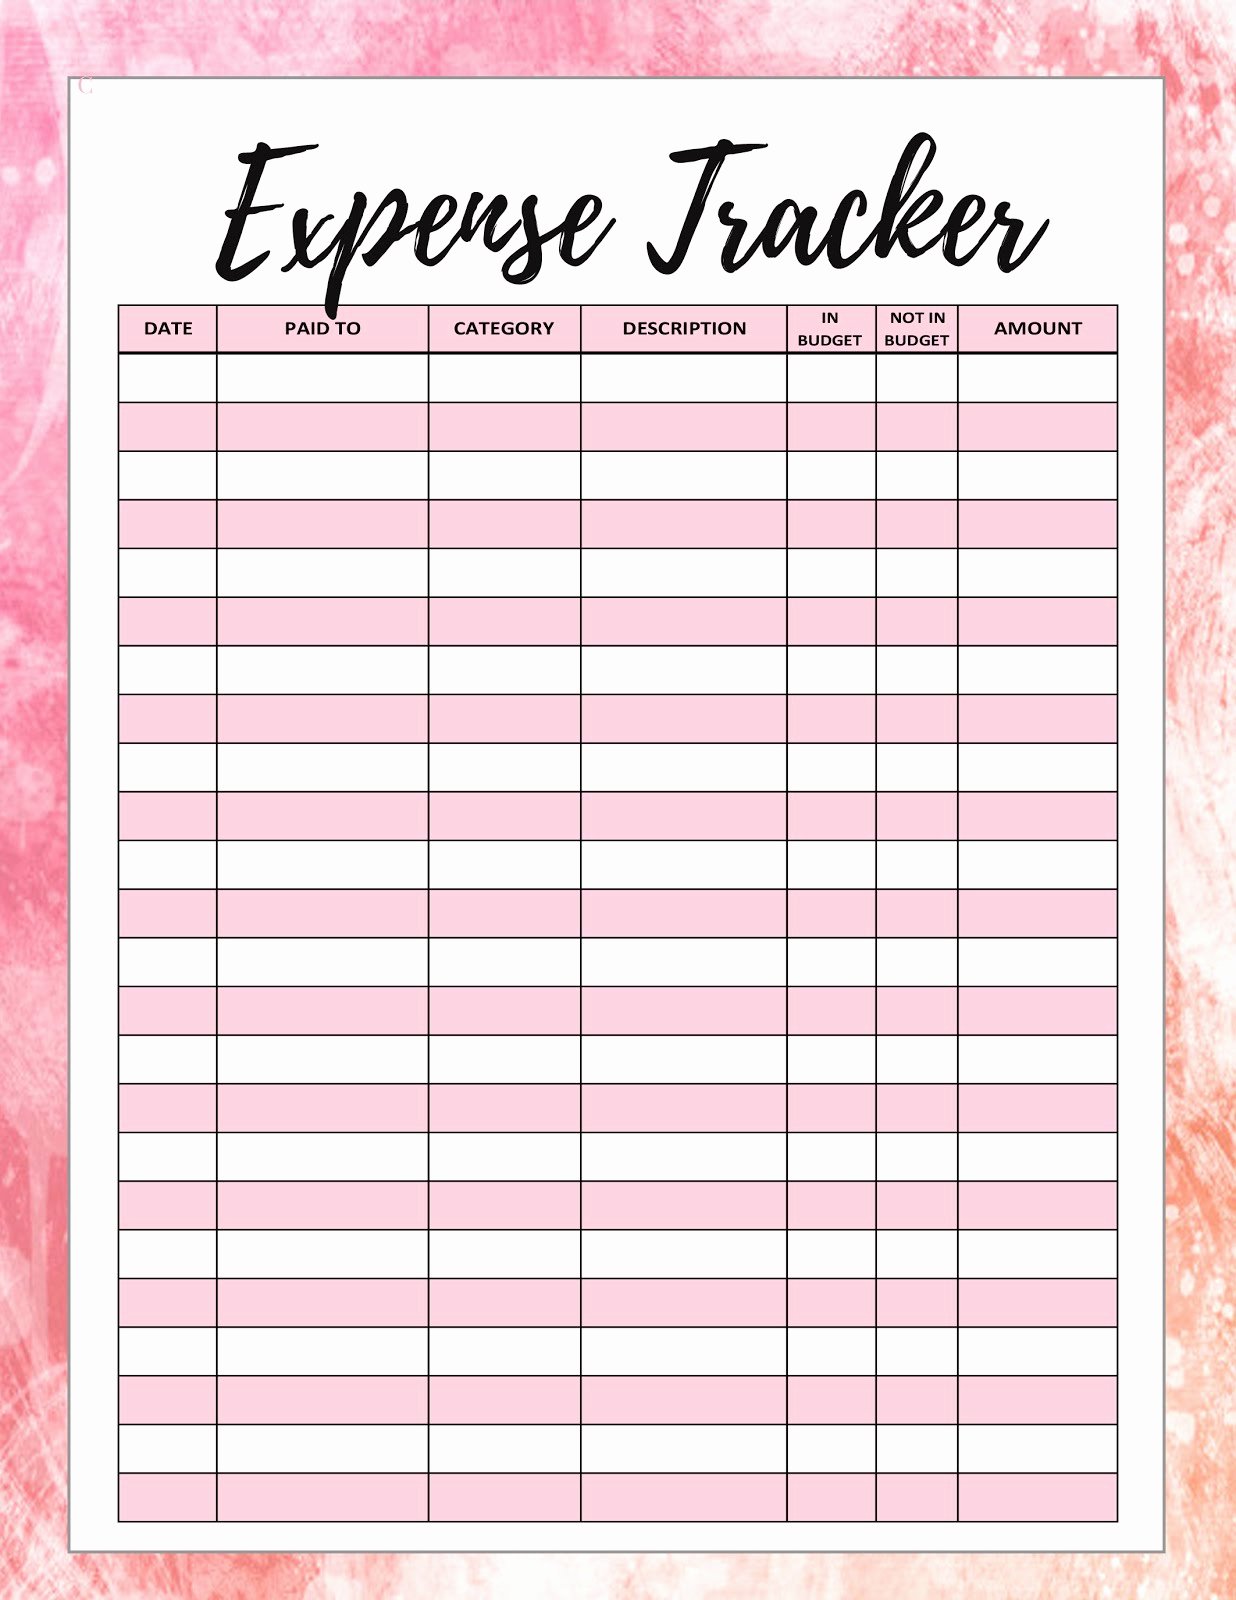 Expense Tracking Sheet Template Inspirational Malena Haas Freebie Friday Printable Spending or Expense